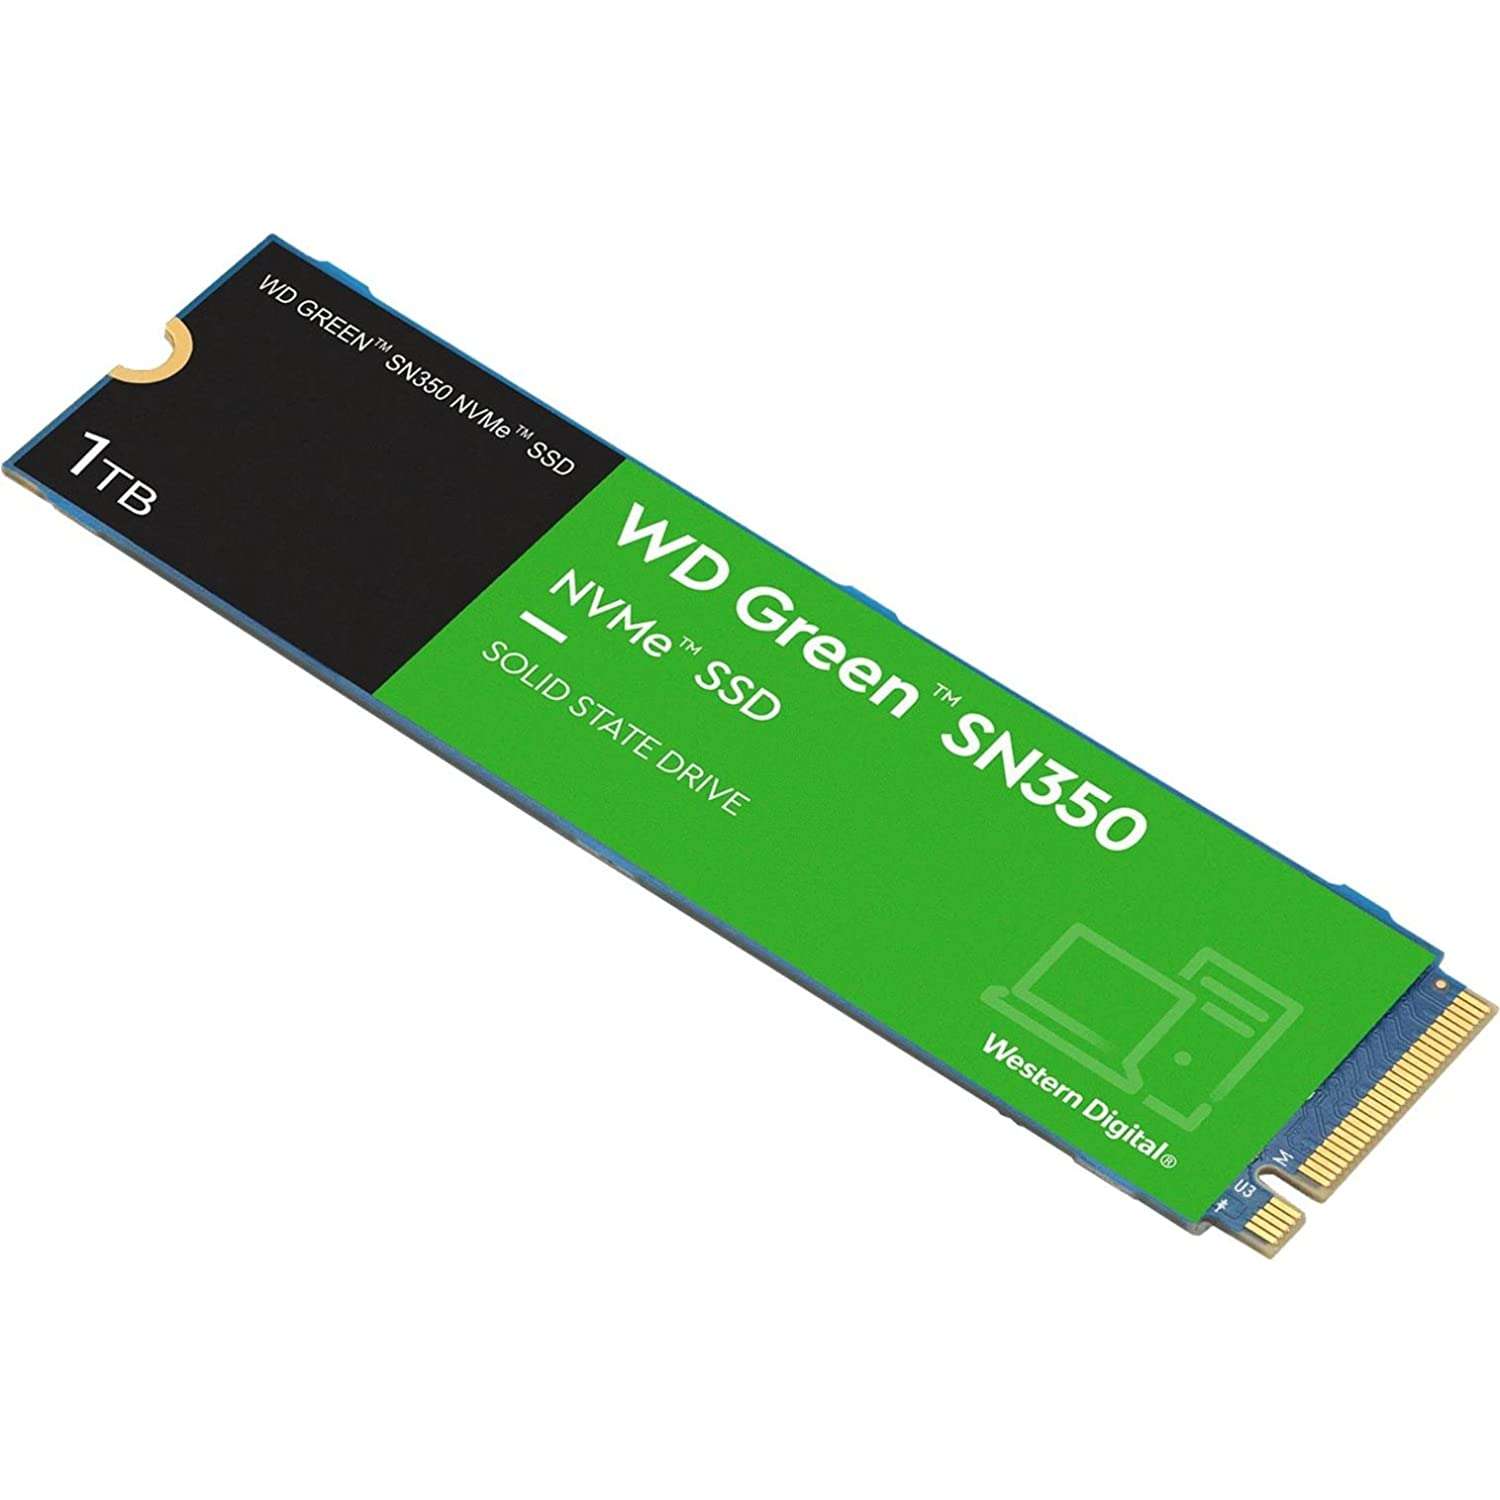 SSD WD Green 240GB M.2 2280 NVMe- Ampro The Laptop Store